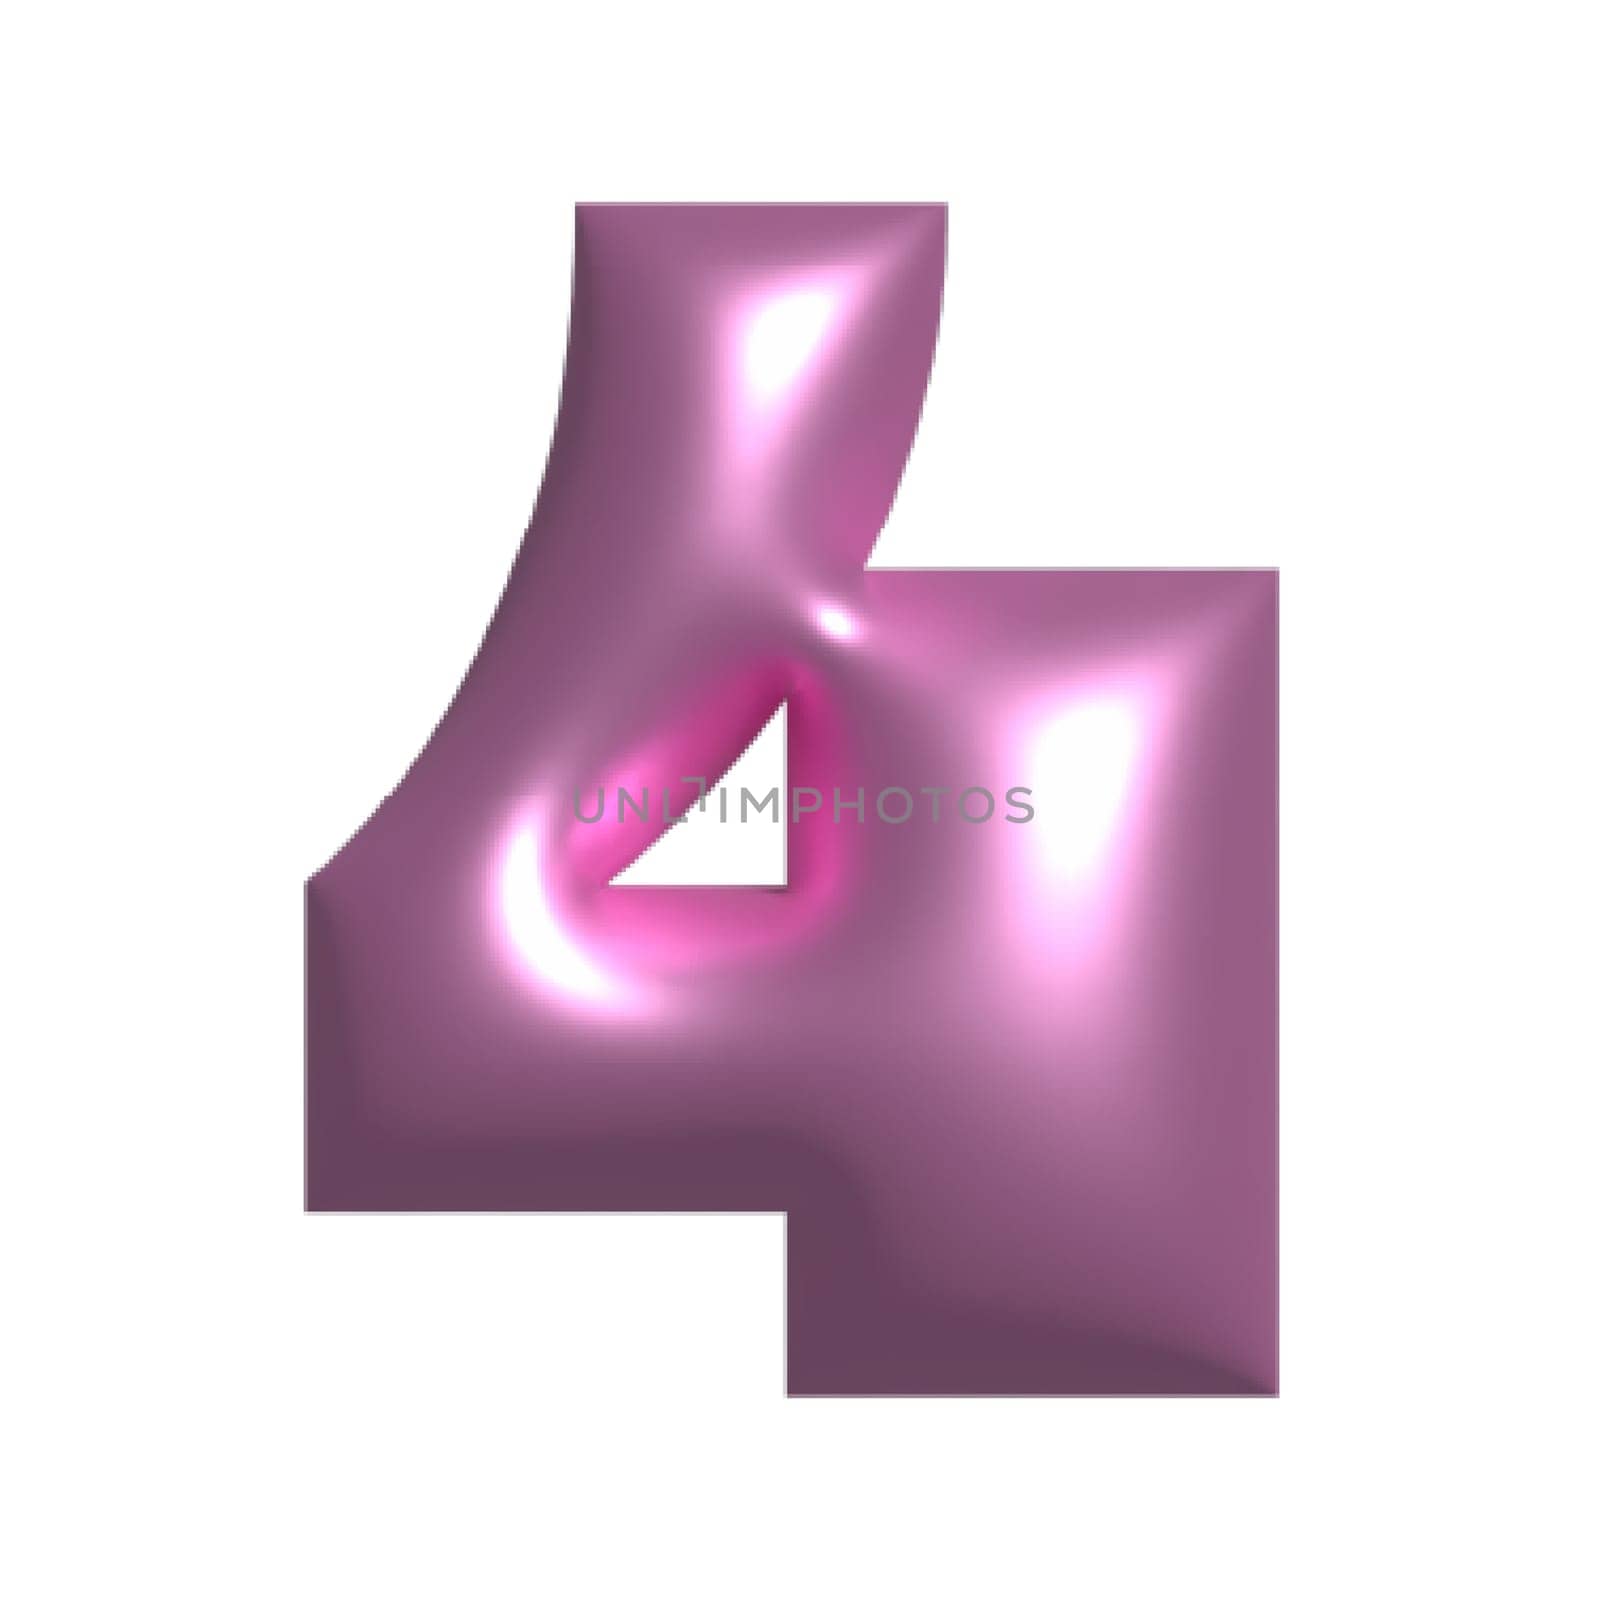 Pink shiny aesthetic metal reflective number 4 3D illustration